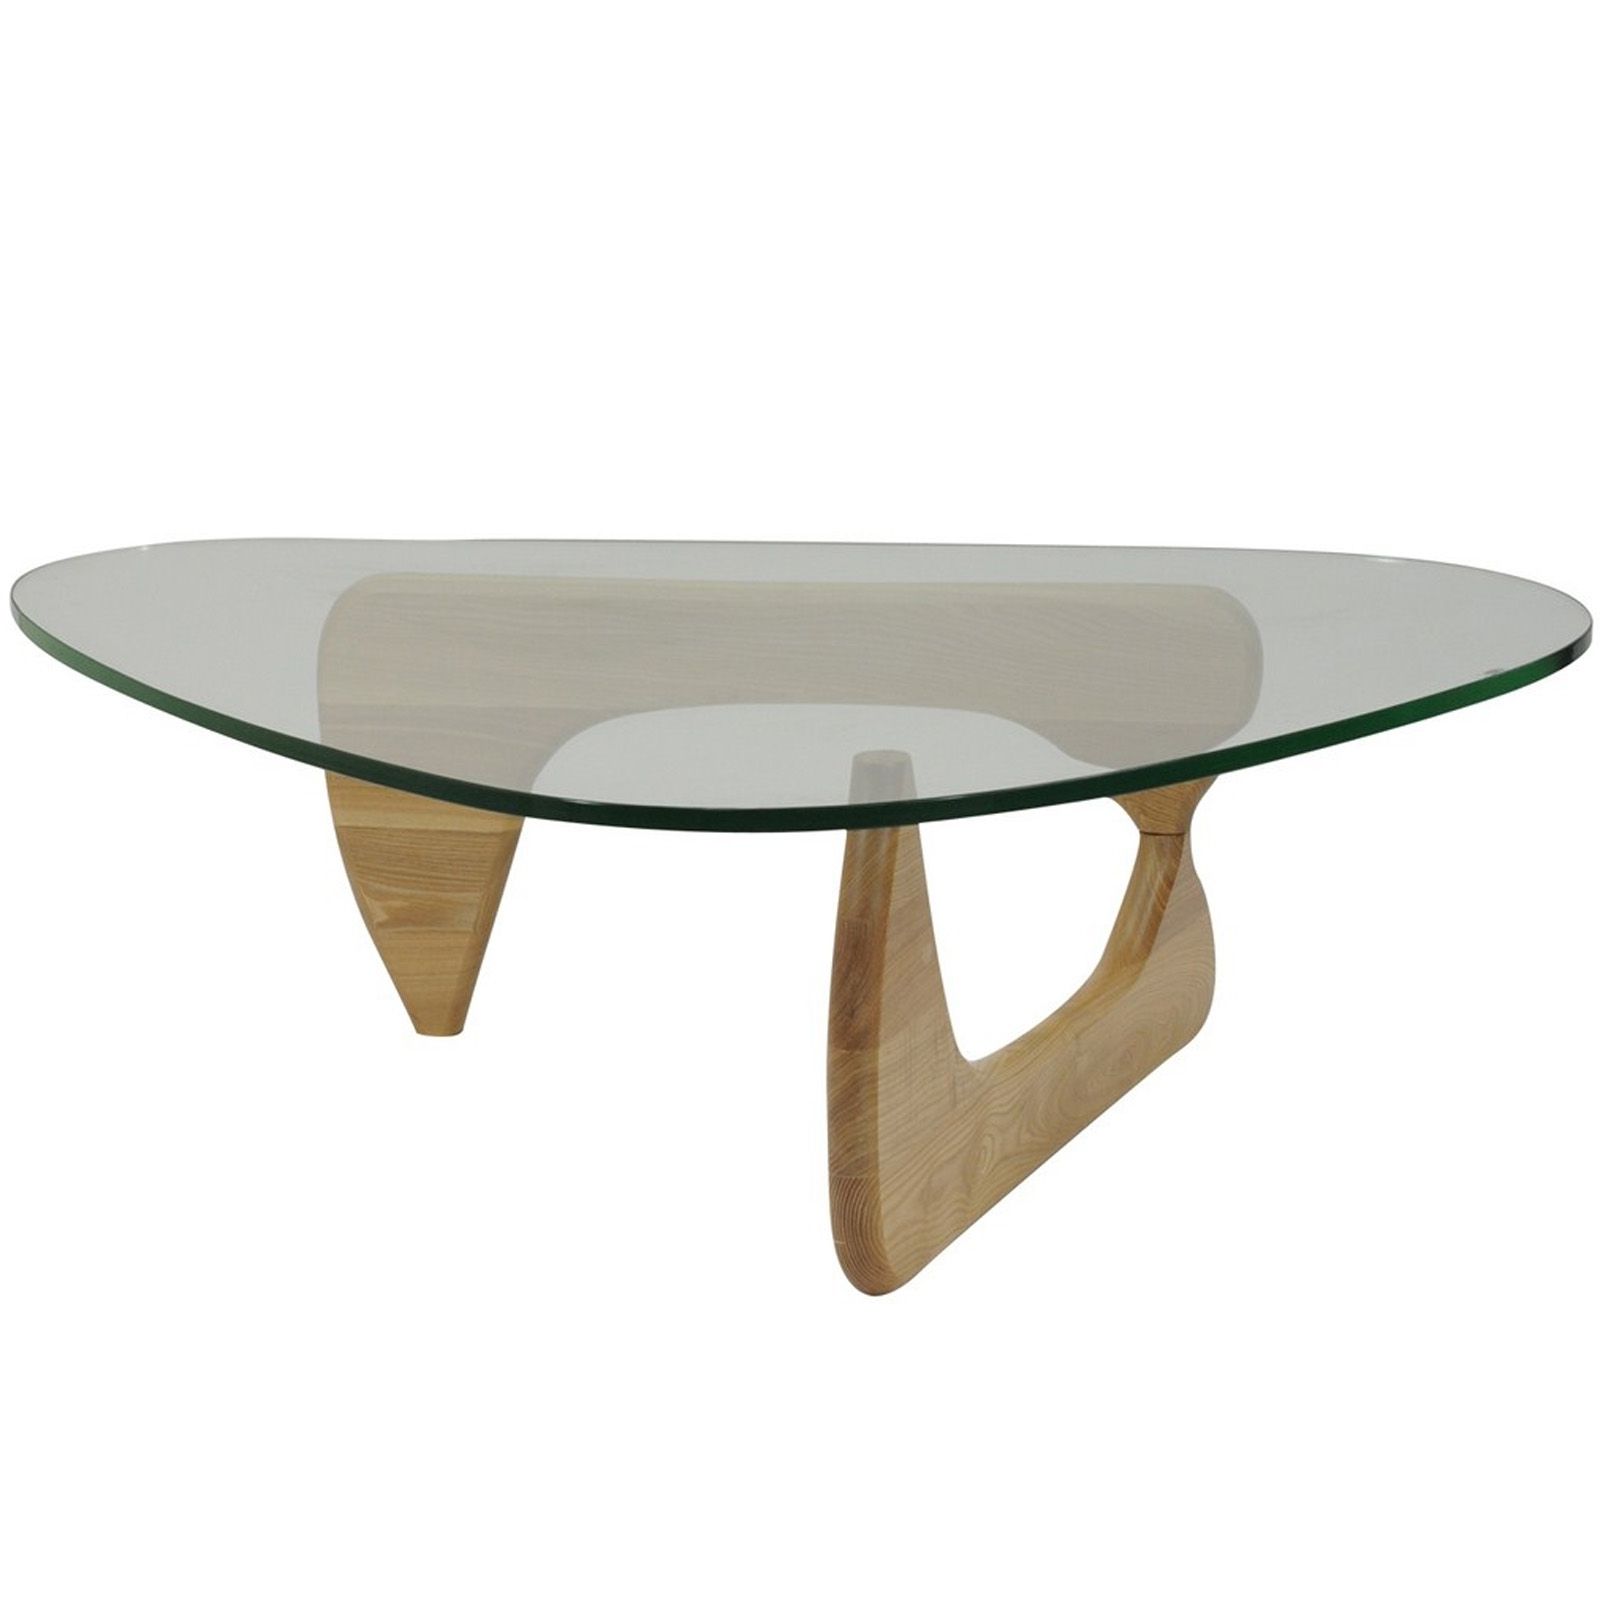 Most Current White Triangular Coffee Tables For Triangle Glass Top Coffee Table, Plans For Diy Cabinets Uk (View 2 of 20)